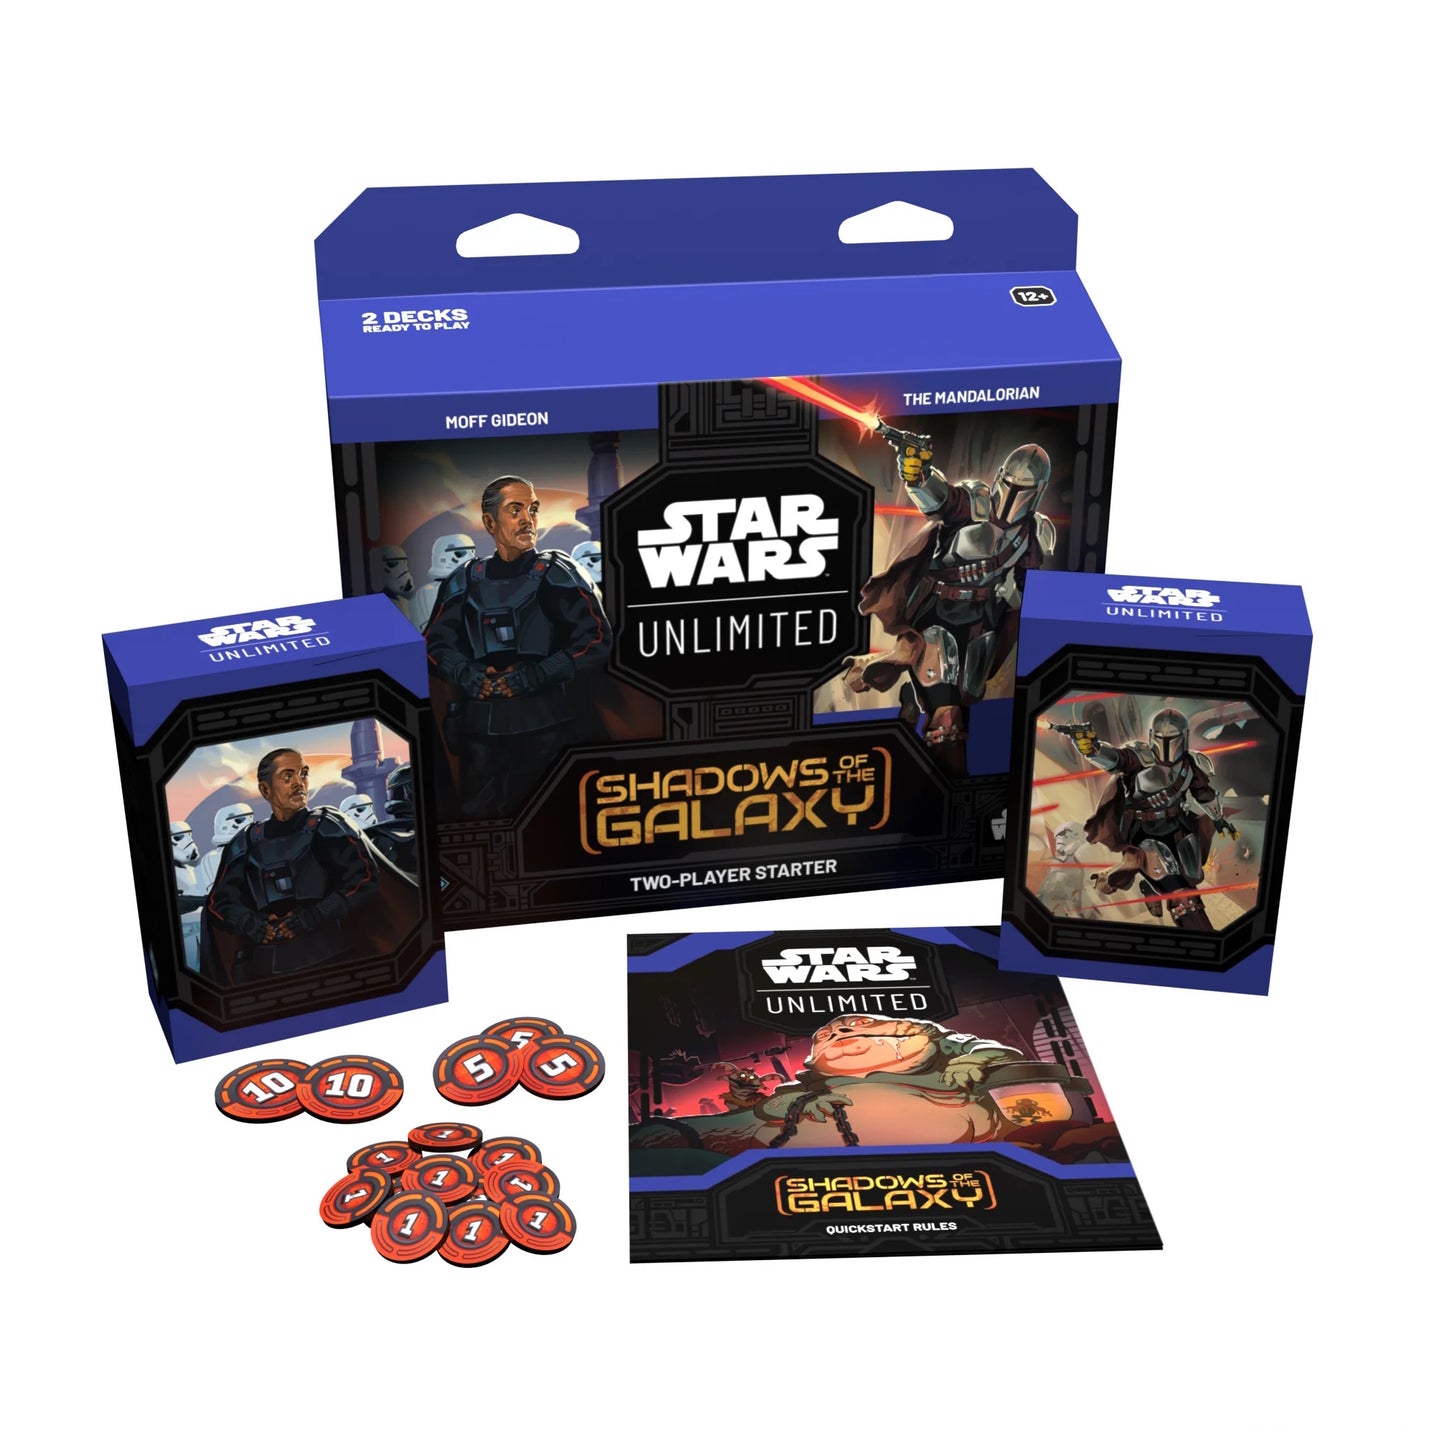 PRE-ORDER: Star Wars: Unlimited Shadows of the Galaxy Two-Player Starter